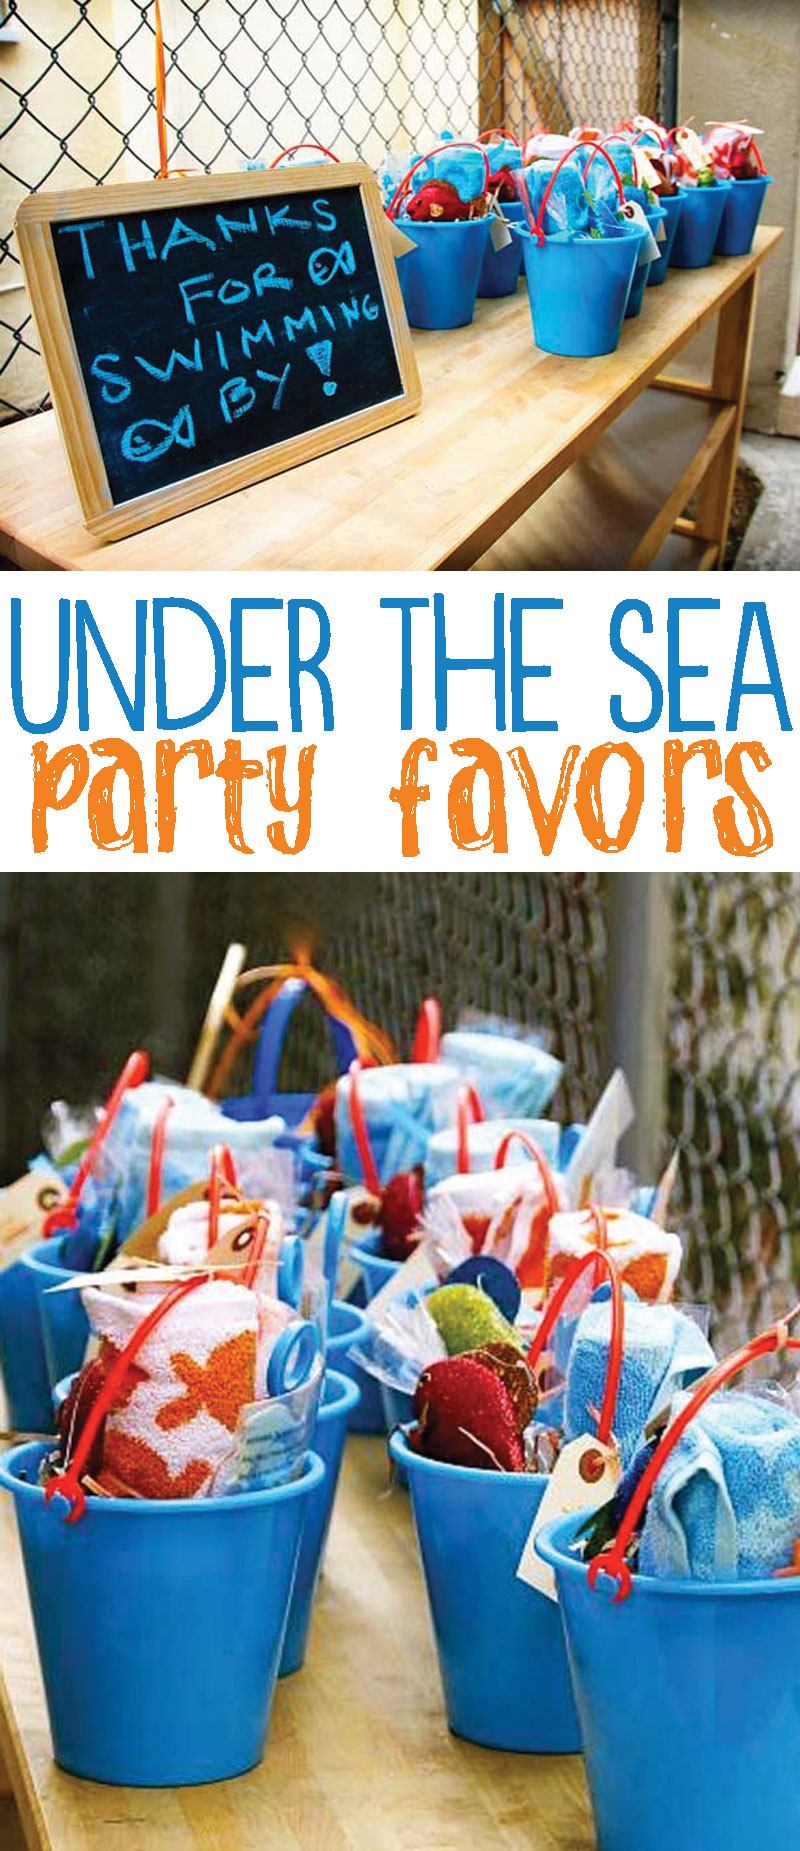 Under The Sea Party Favors on Love The Day